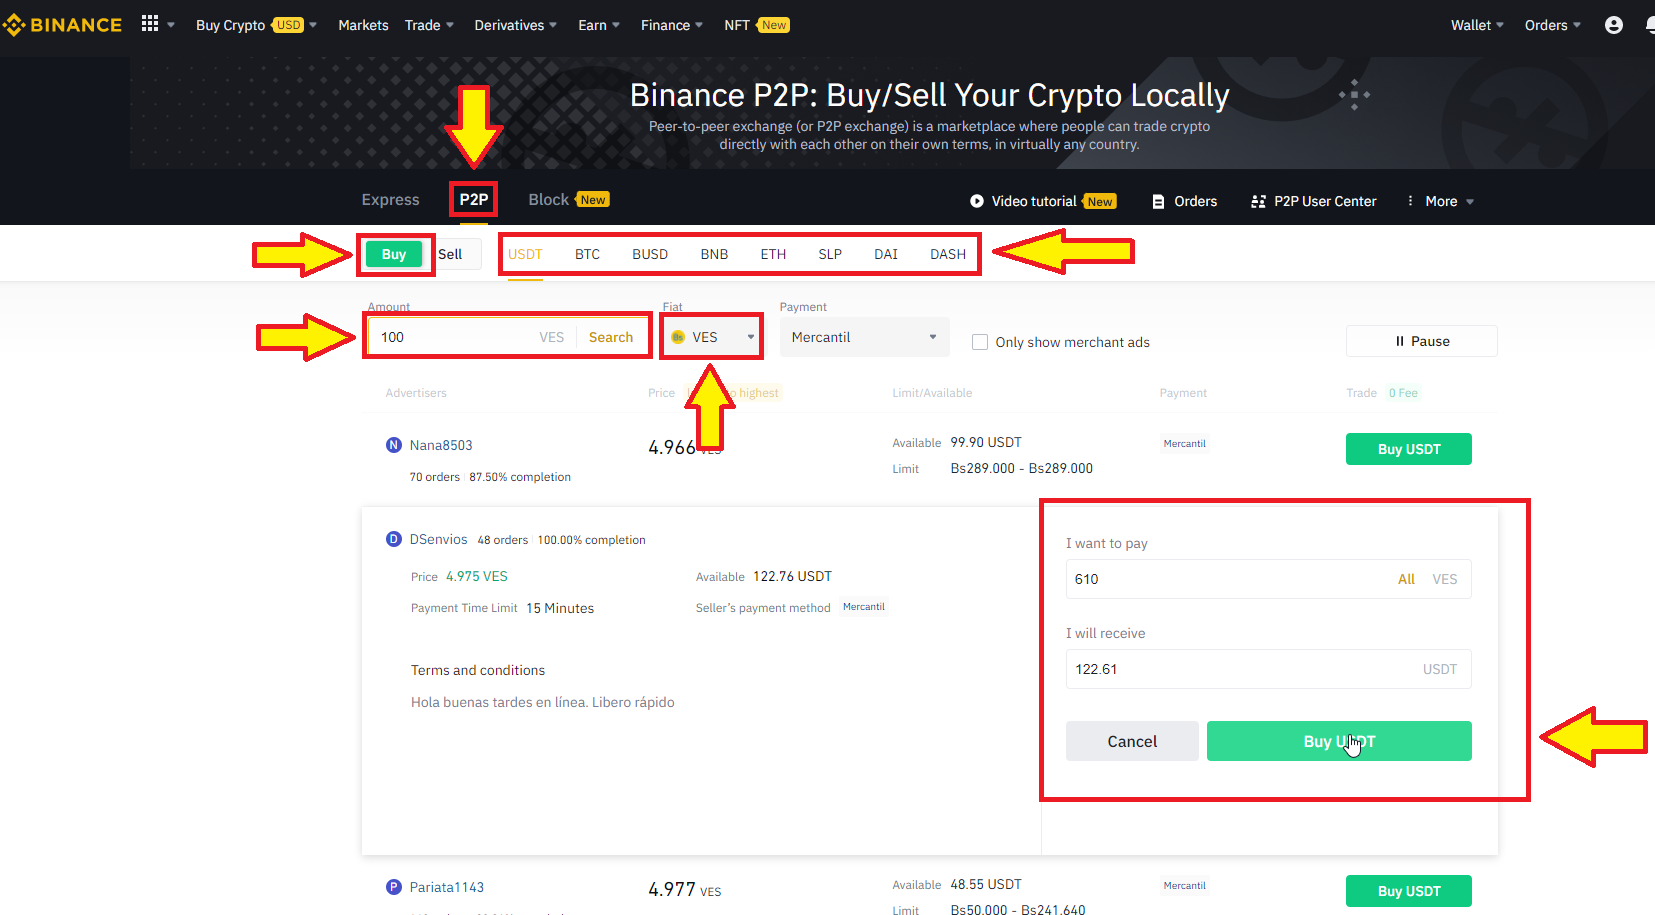 Buy Filecoin crypto in P2P with a verified account on Binance